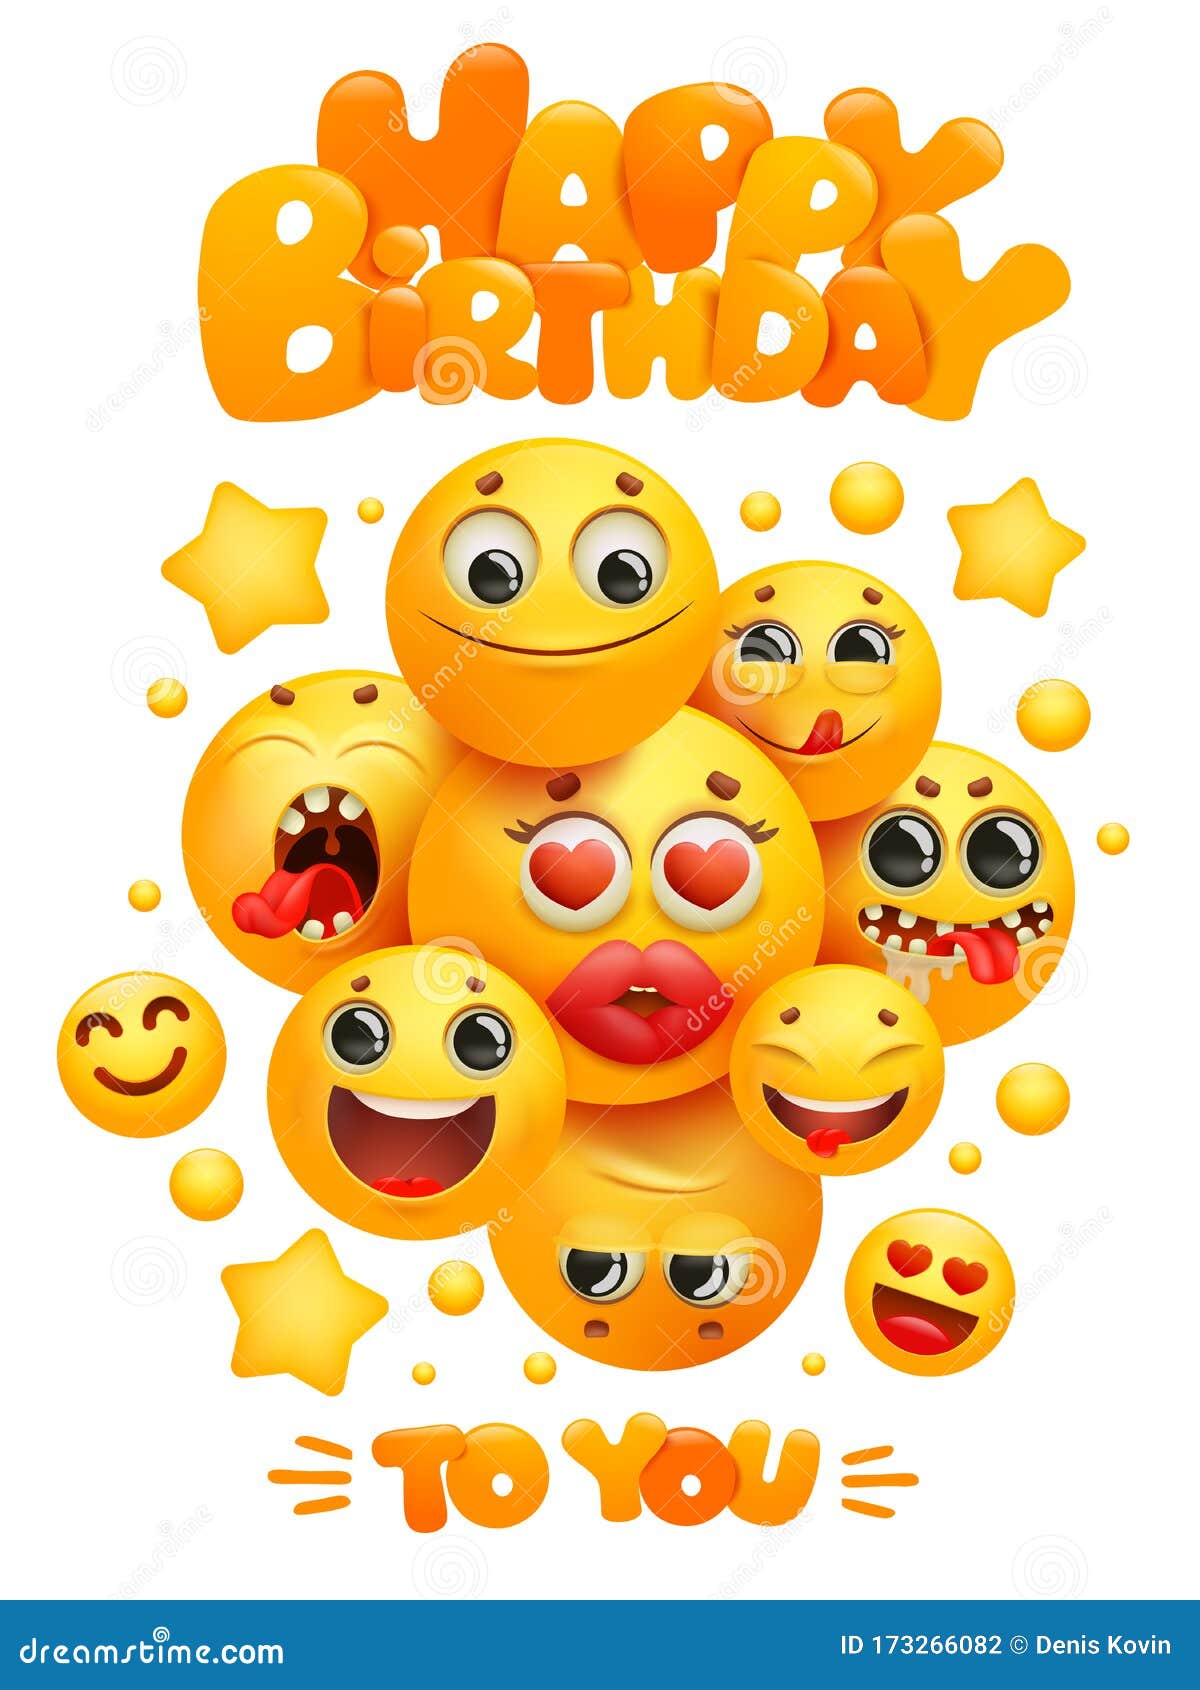 Happy Birthday Greeting Card Template with Group of Emoji Cartoon Yellow  Smile Characters Stock Illustration - Illustration of celebrate,  anniversary: 173266082